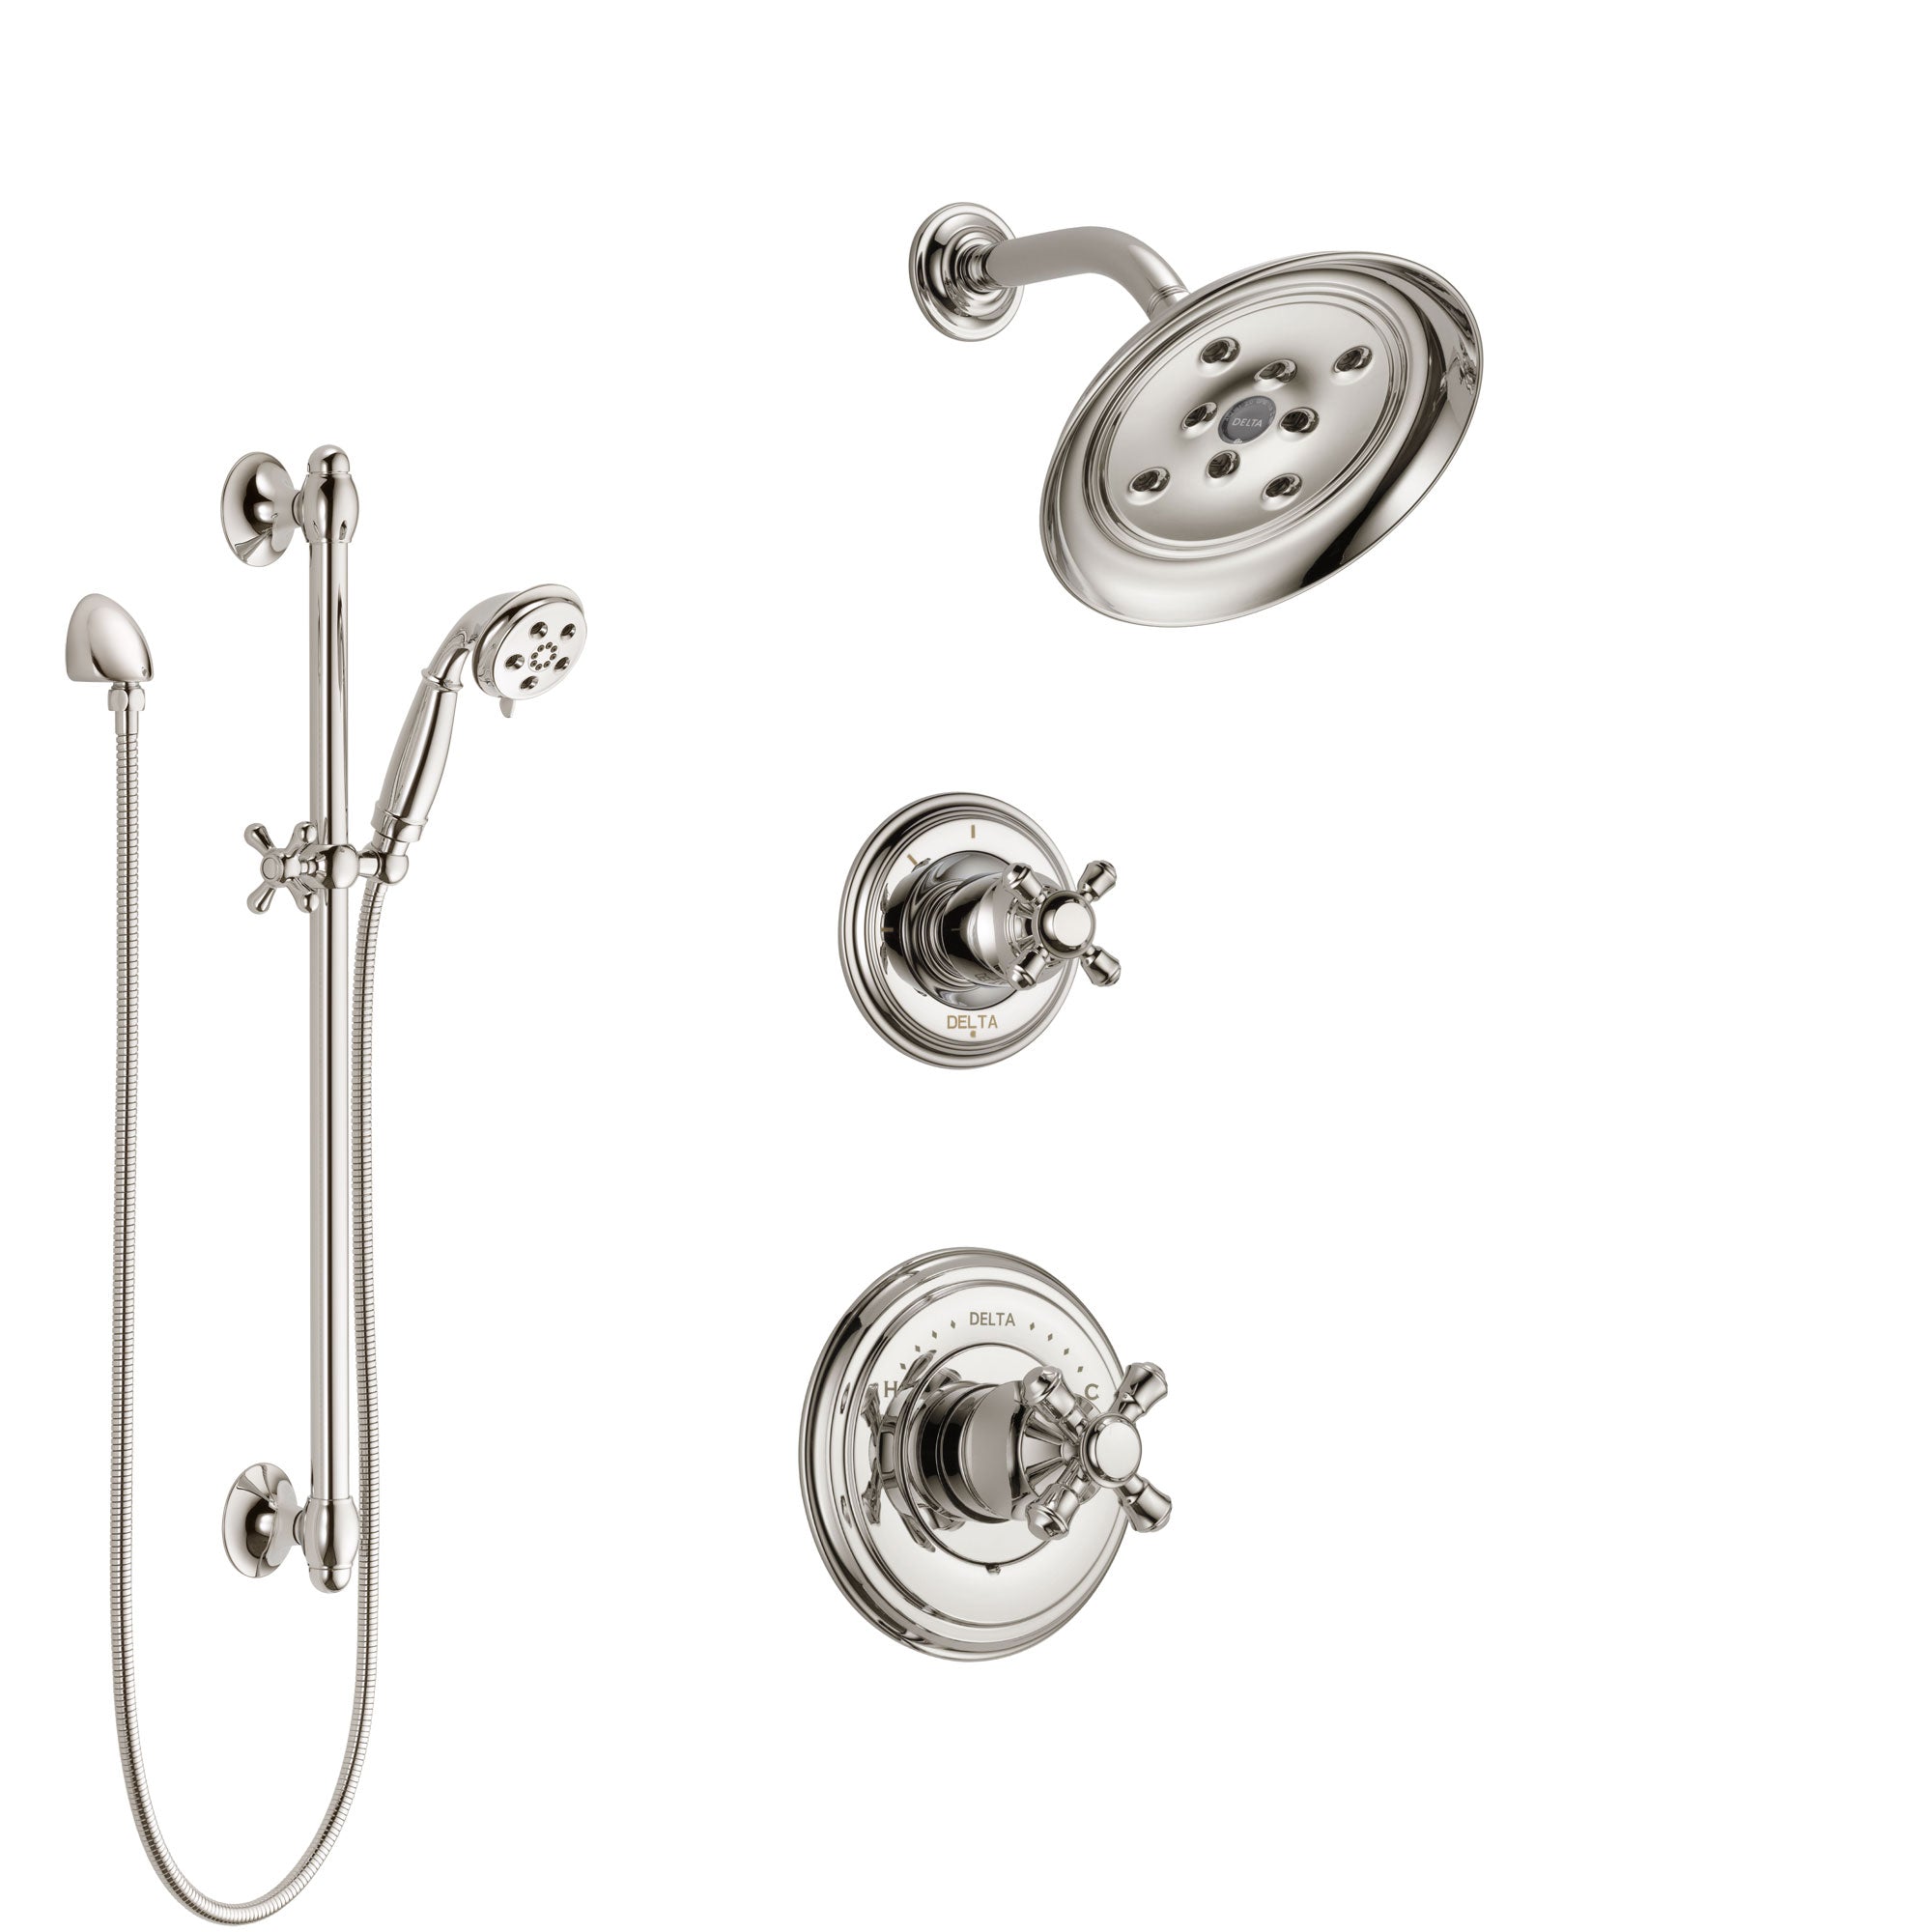 Delta Cassidy Polished Nickel Finish Shower System with Control Handle, 3-Setting Diverter, Showerhead, and Hand Shower with Slidebar SS142971PN2